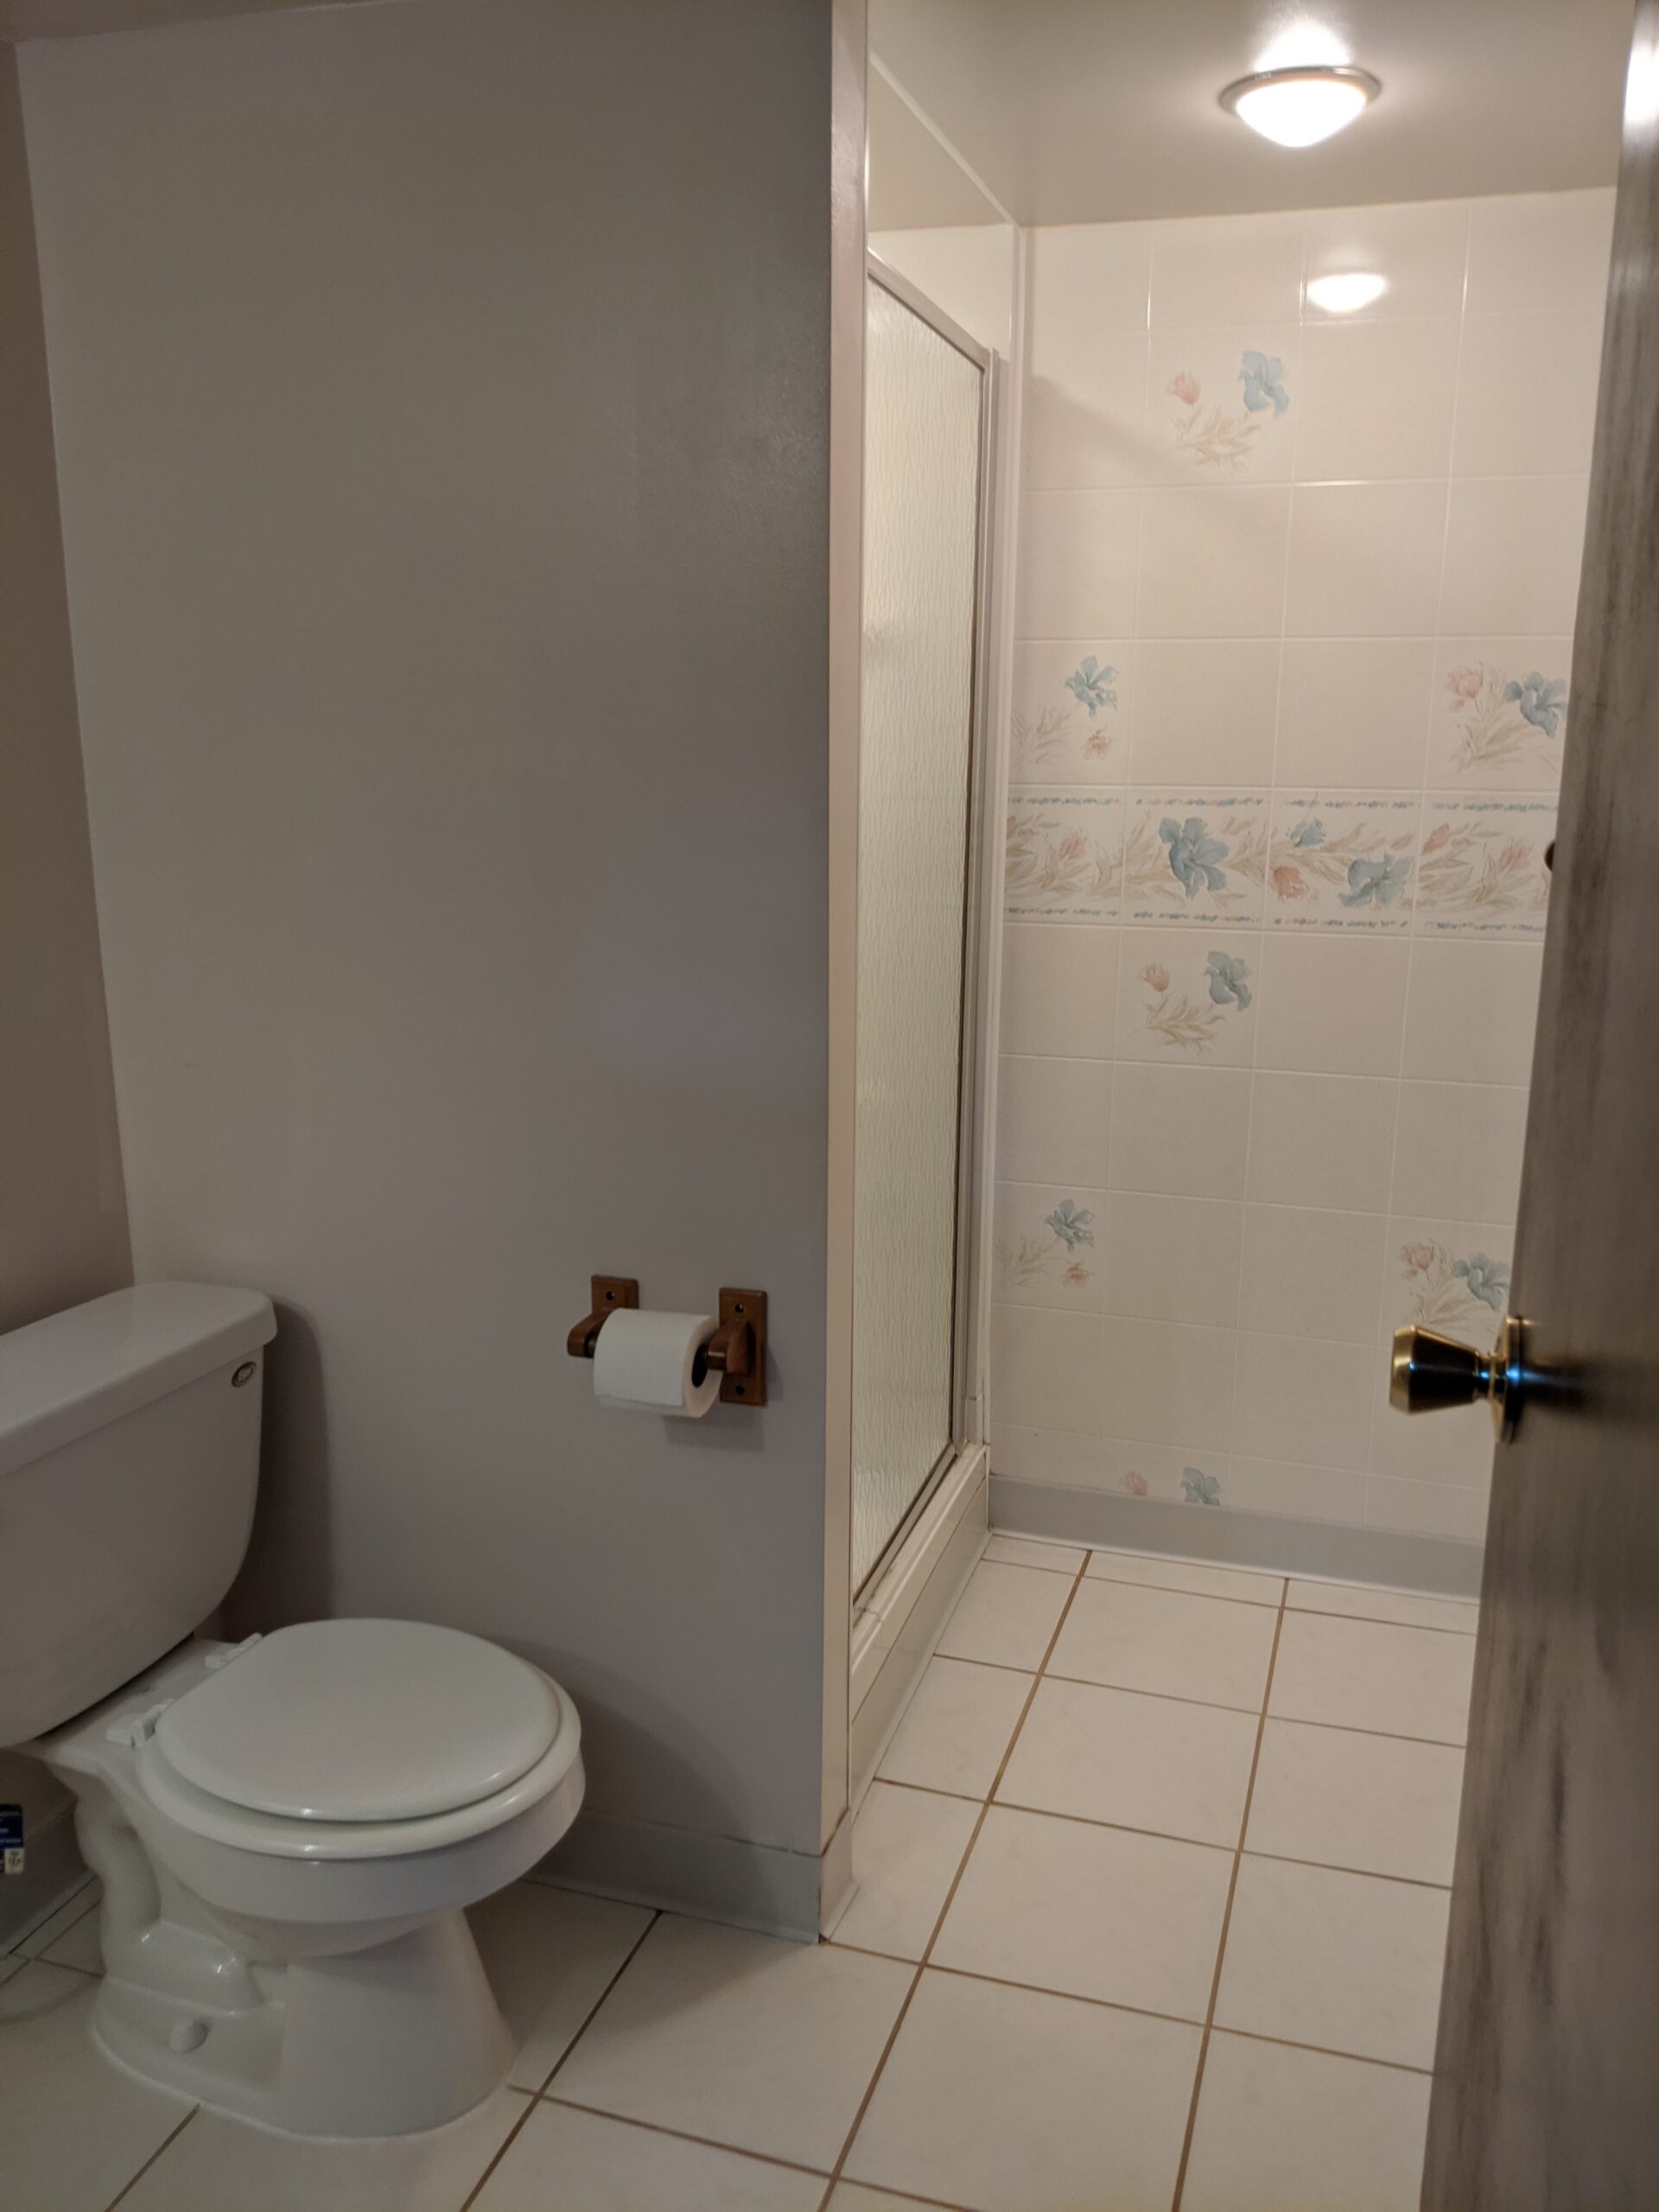 The basement bathroom wasn’t fancy but it was in fine condition. We decided to redo the layout and move the washer and dryer into the bathroom.